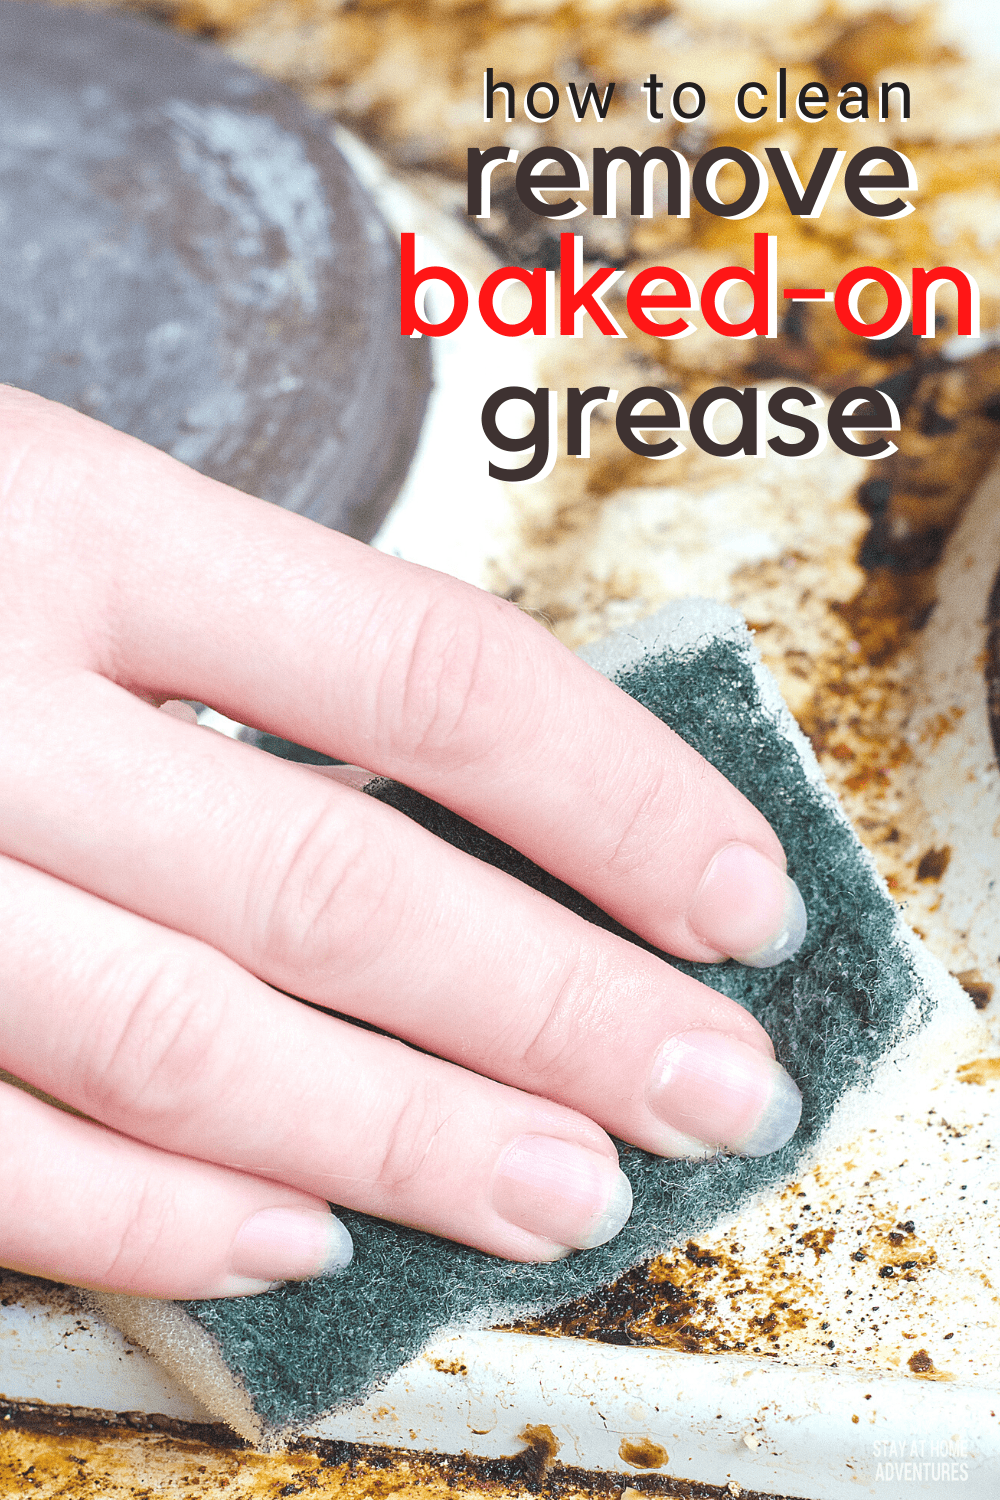 Learn two effective ways to clean baked-on grease from your stove that are fast and effective and will keep your stove looking clean. #cleanstove #cleaningtips #howto via @mystayathome